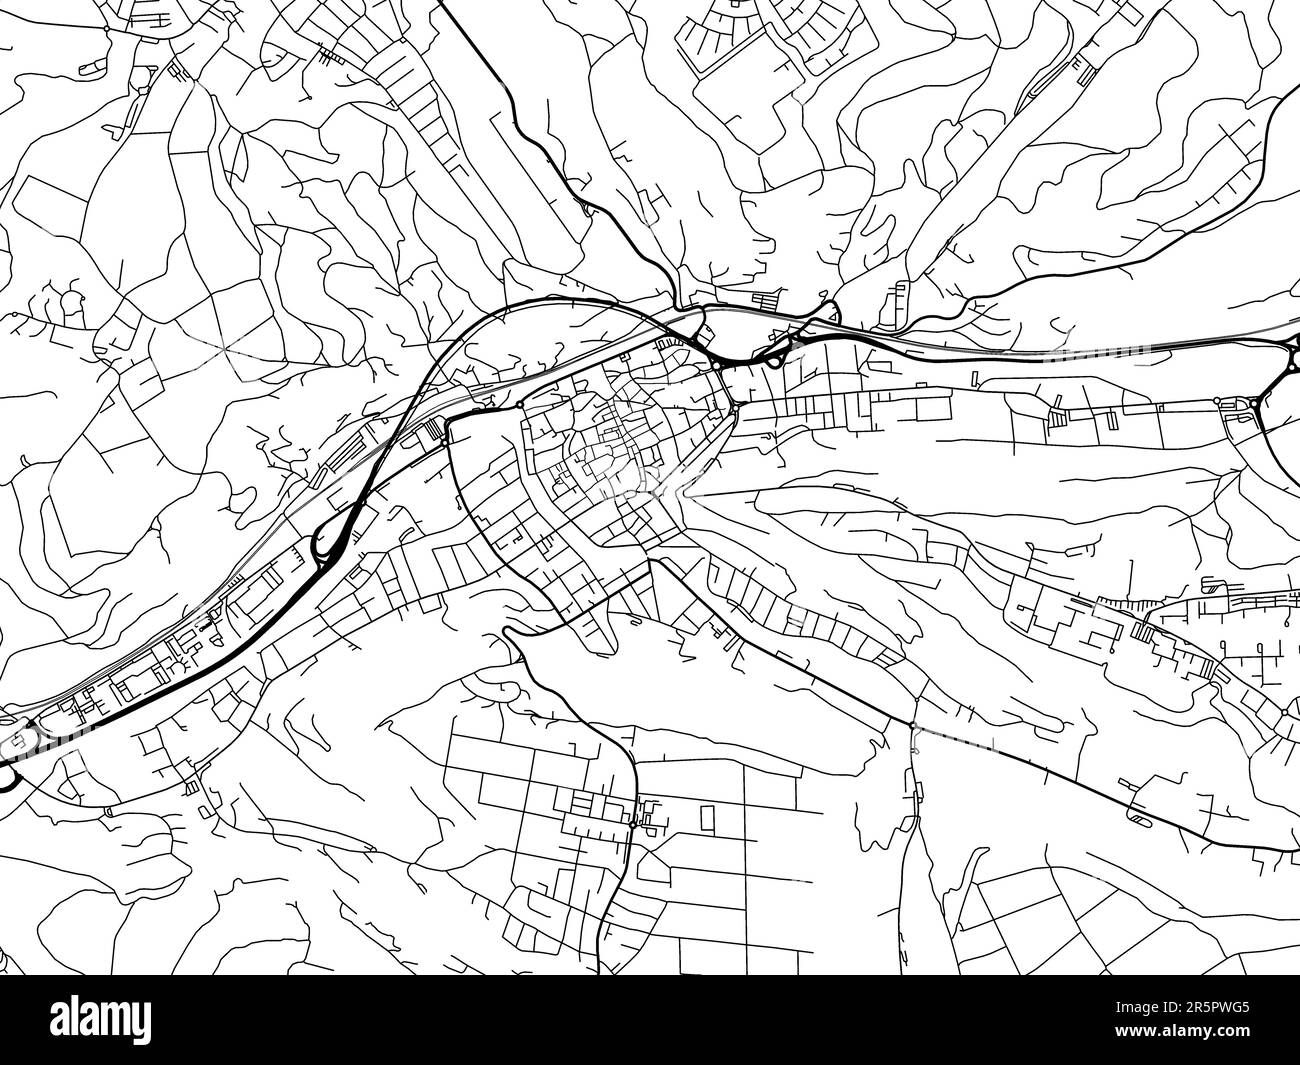 Vector road map of the city of  Swabisch Gmund in Germany on a white background. Stock Photo